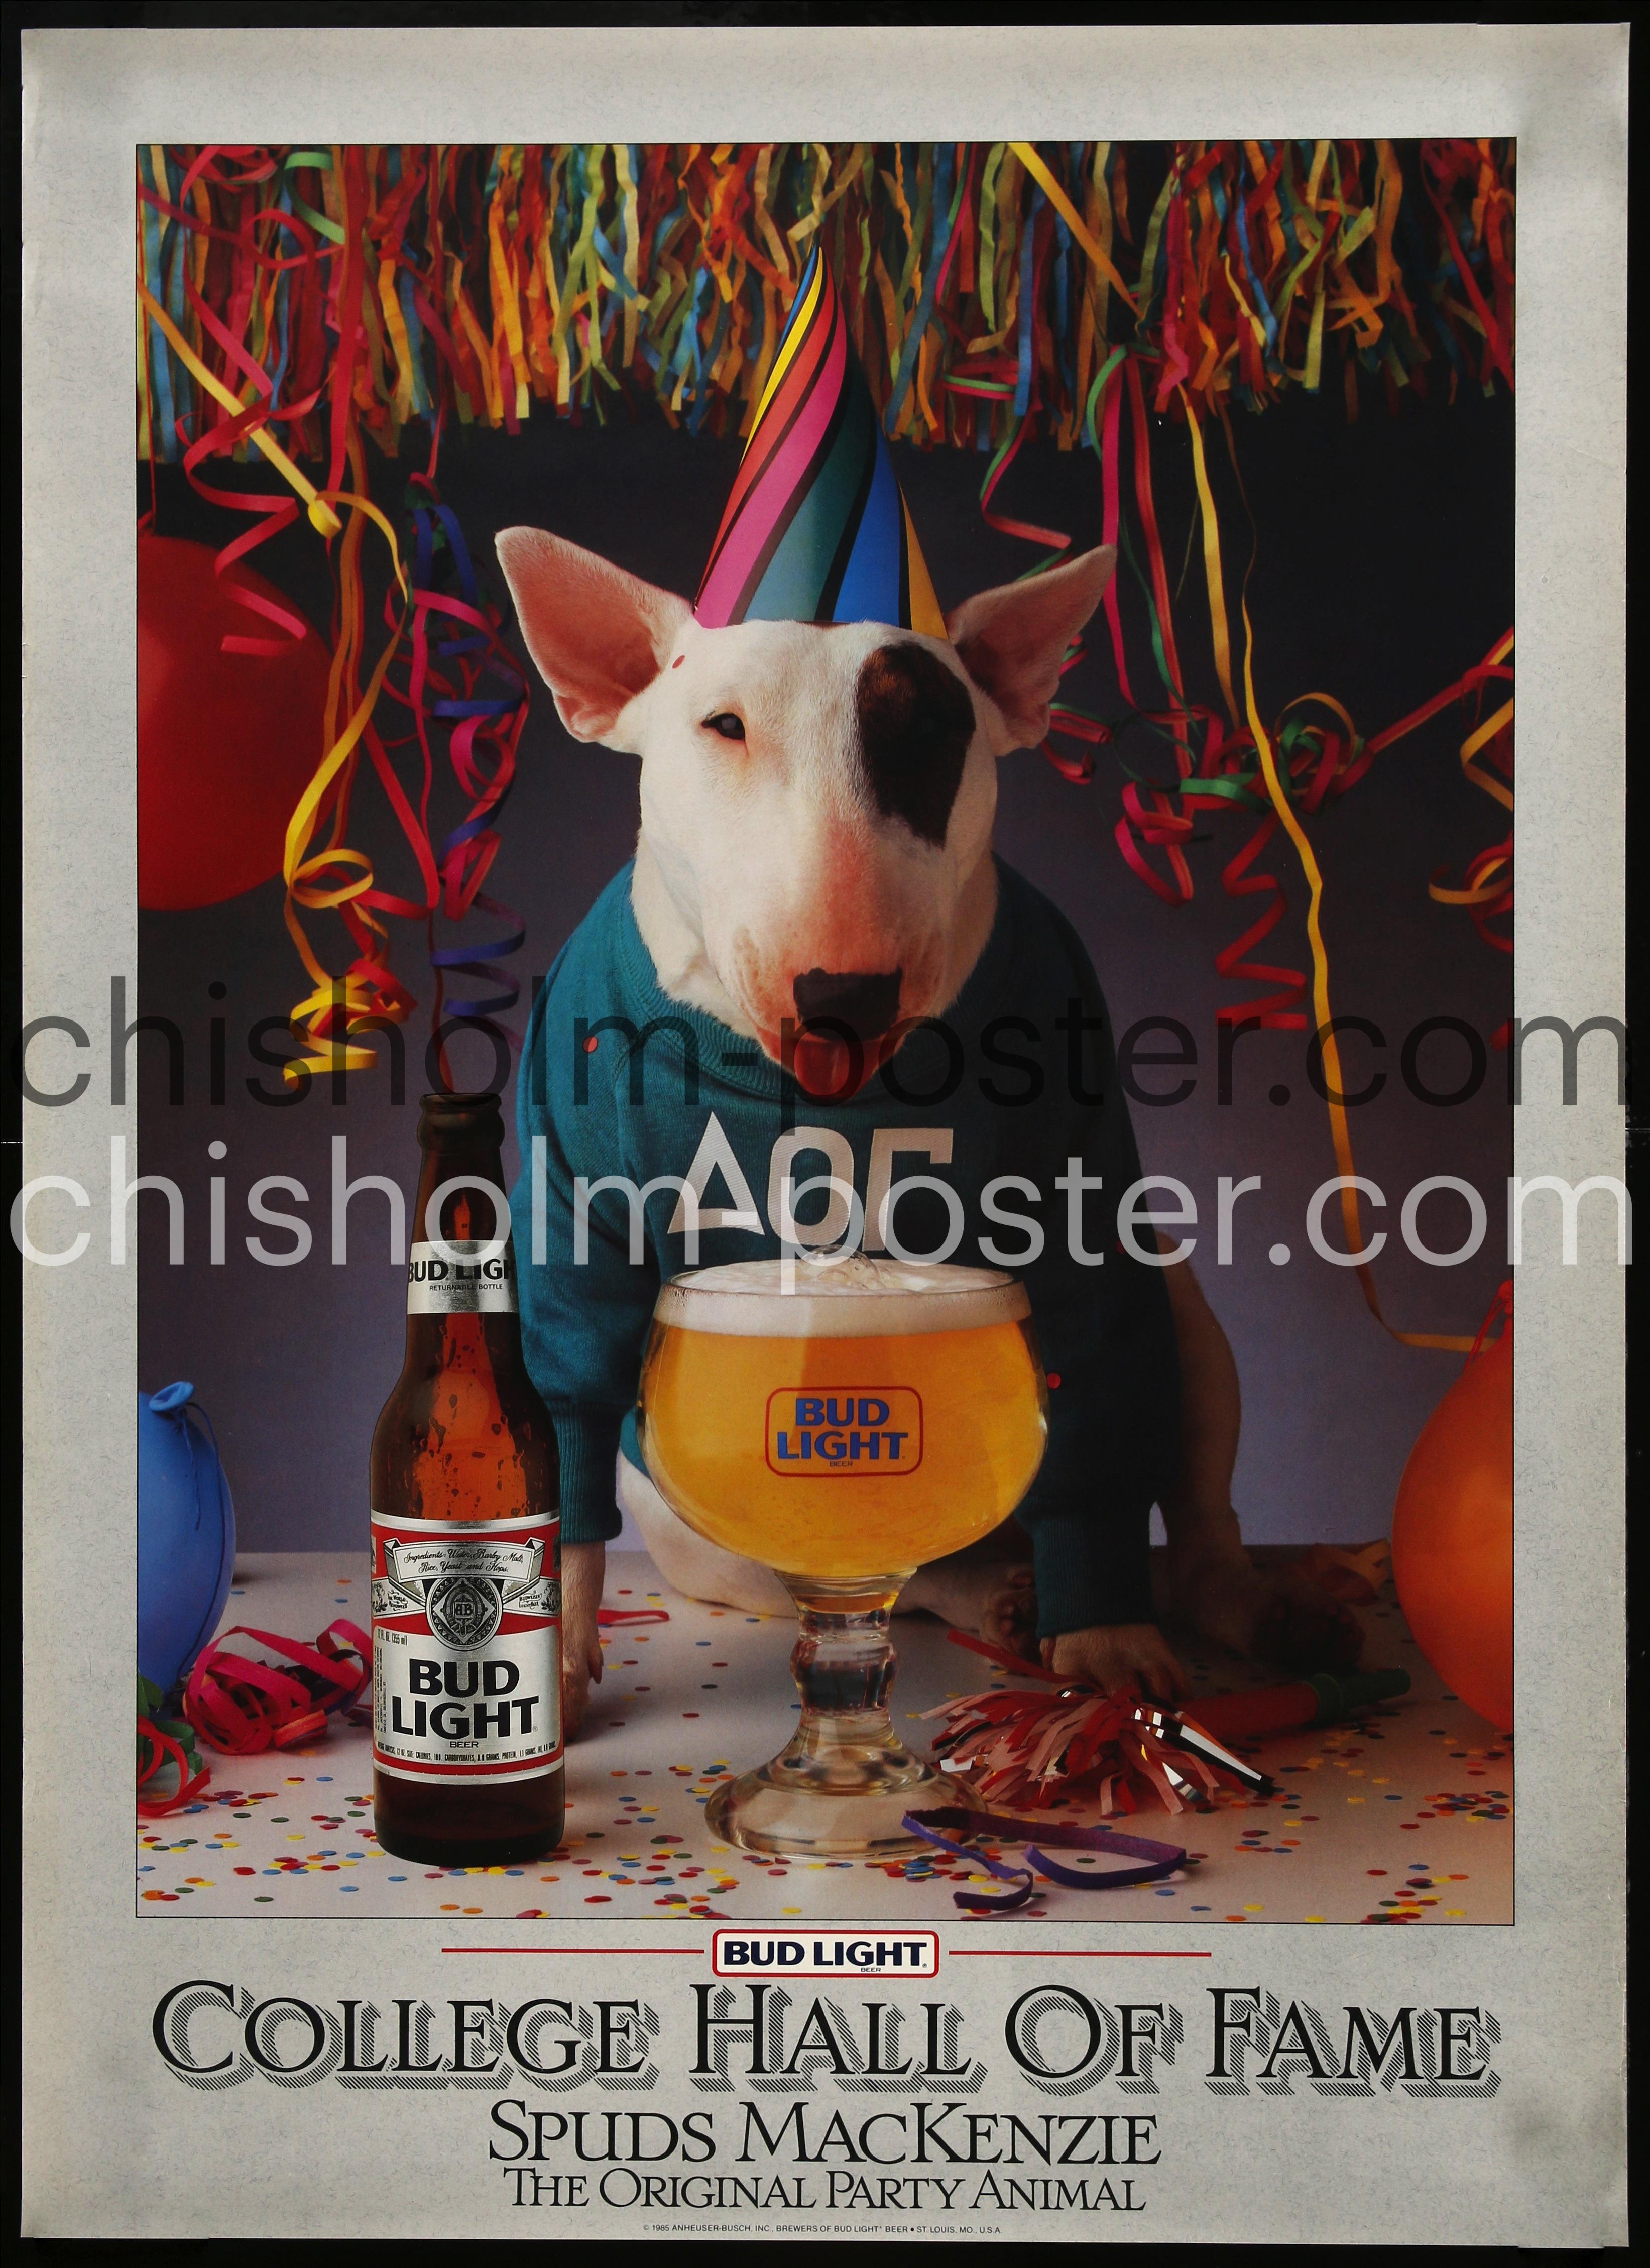 Be my Beer Buddy Poster for Sale by ketankh